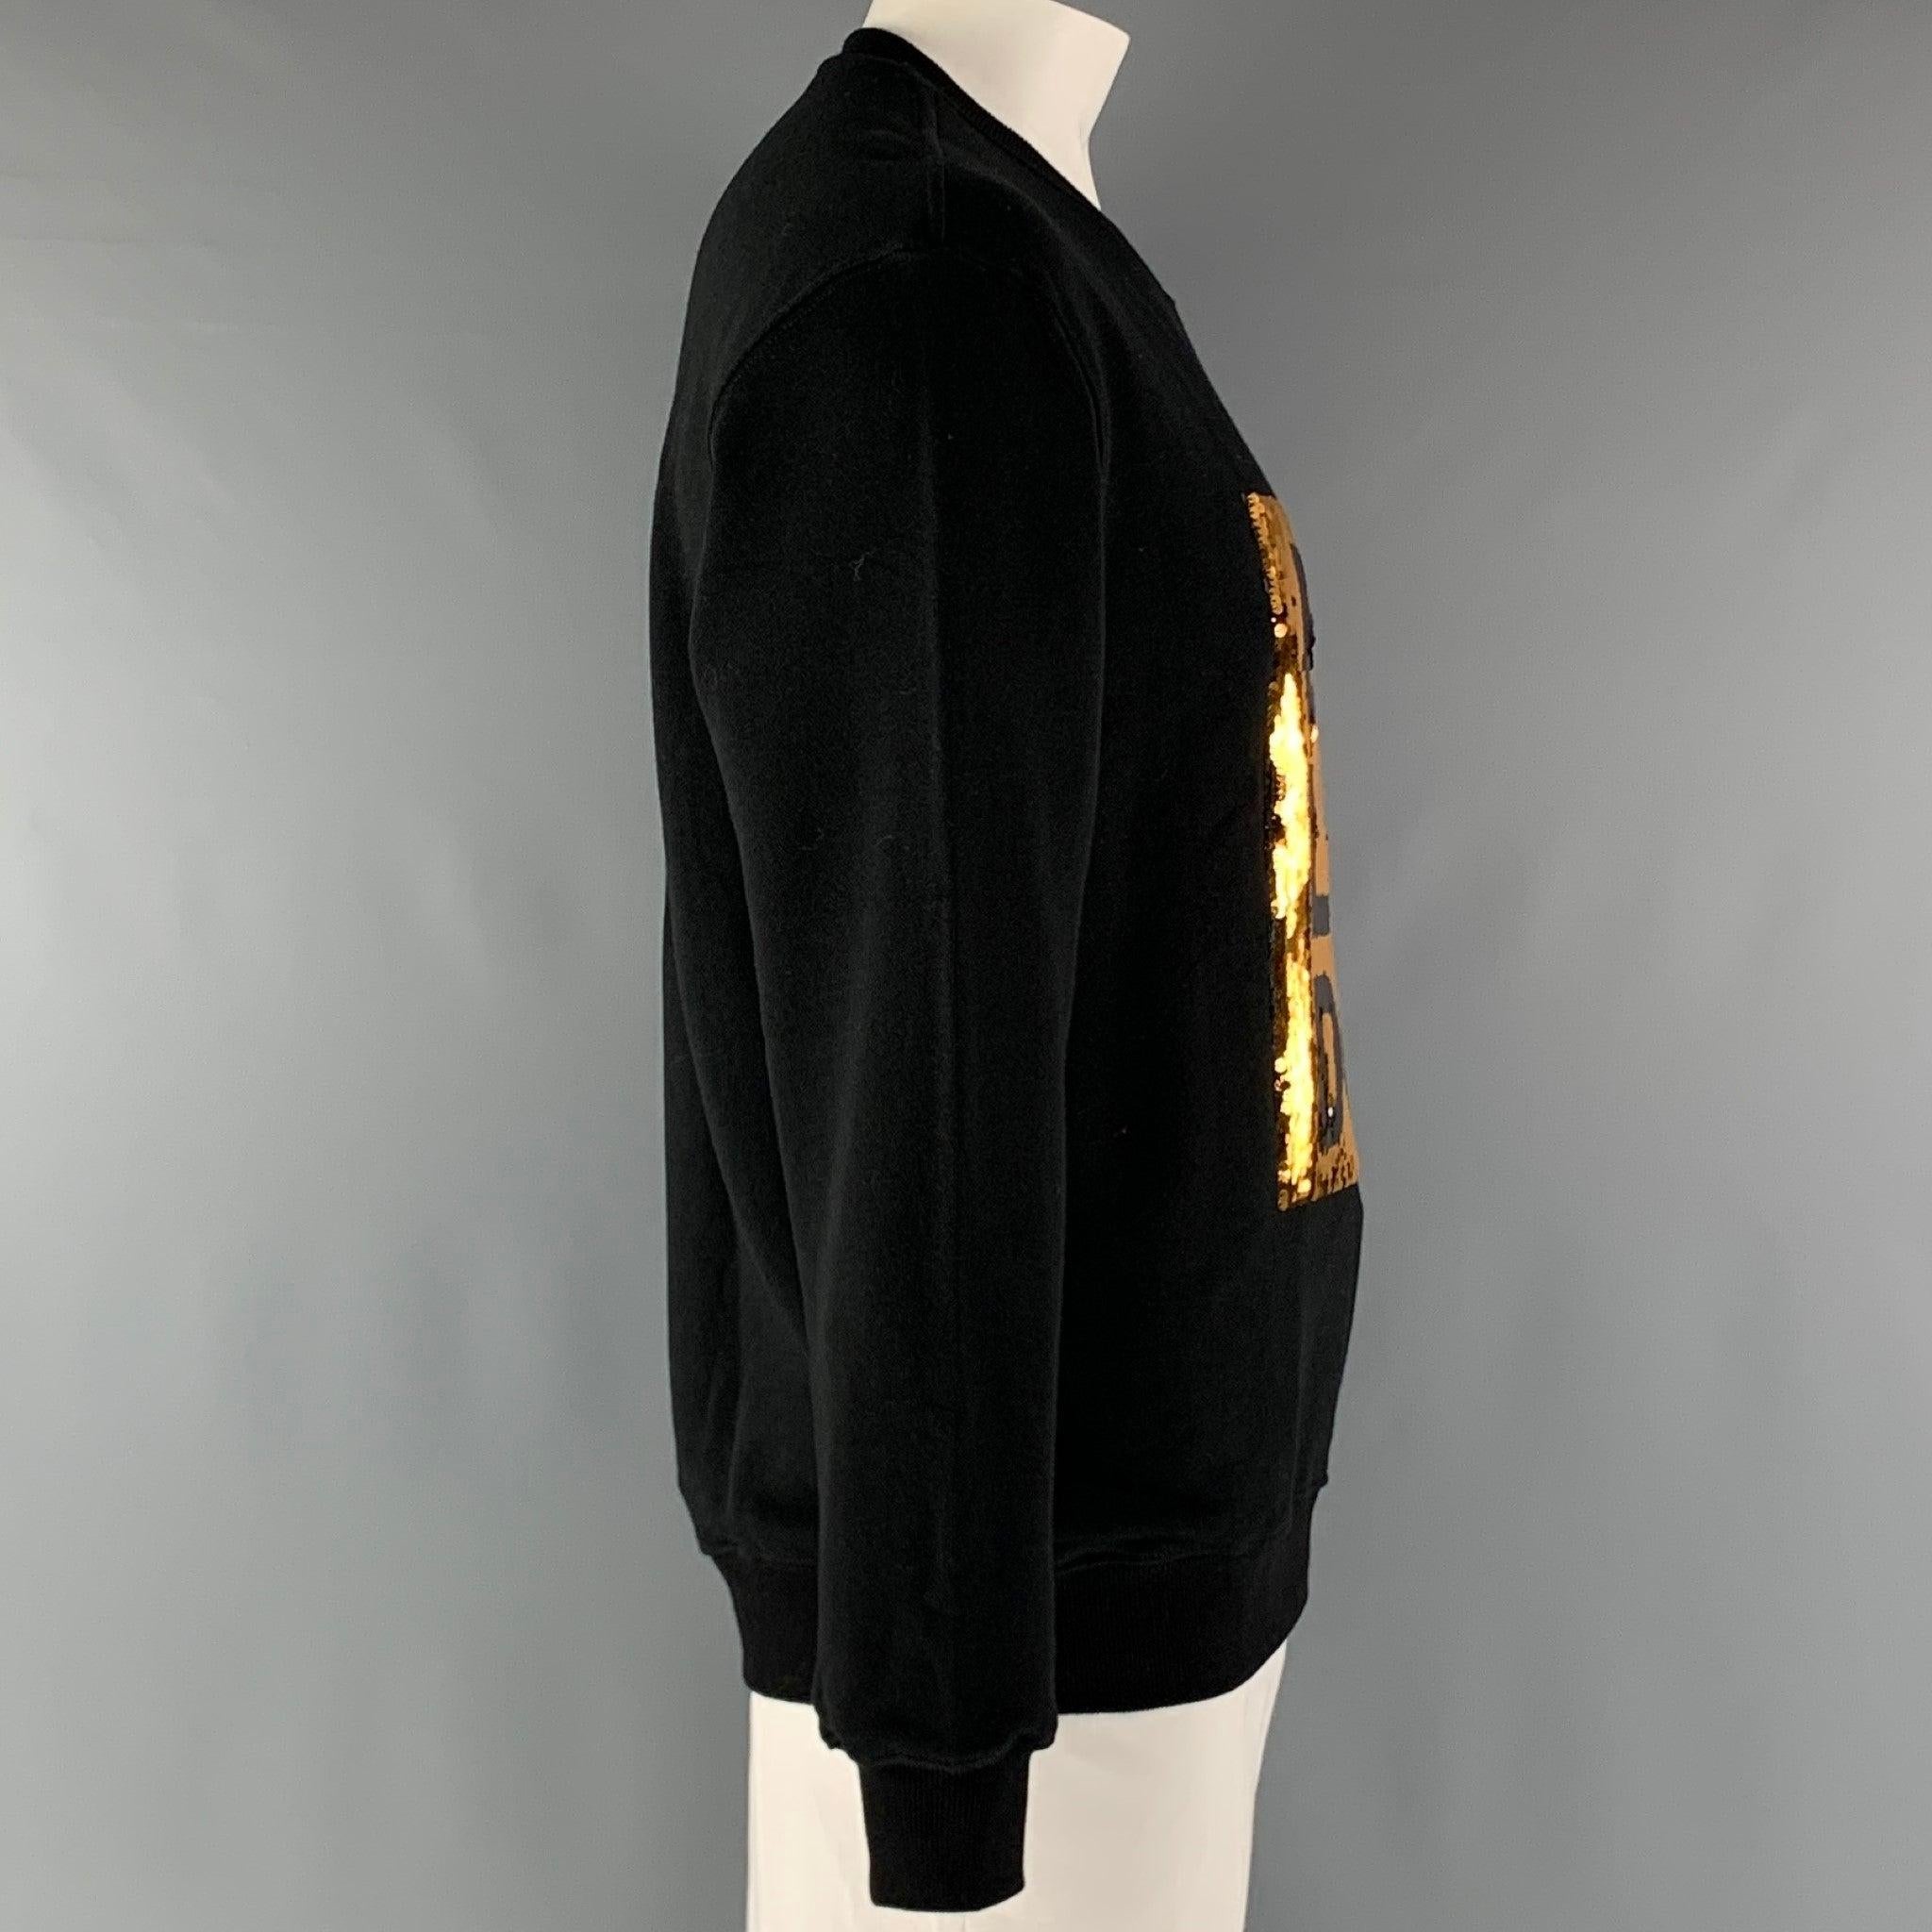 BOY LONDON Size L Black Gold Sequined Cotton Sweatshirt In Excellent Condition For Sale In San Francisco, CA